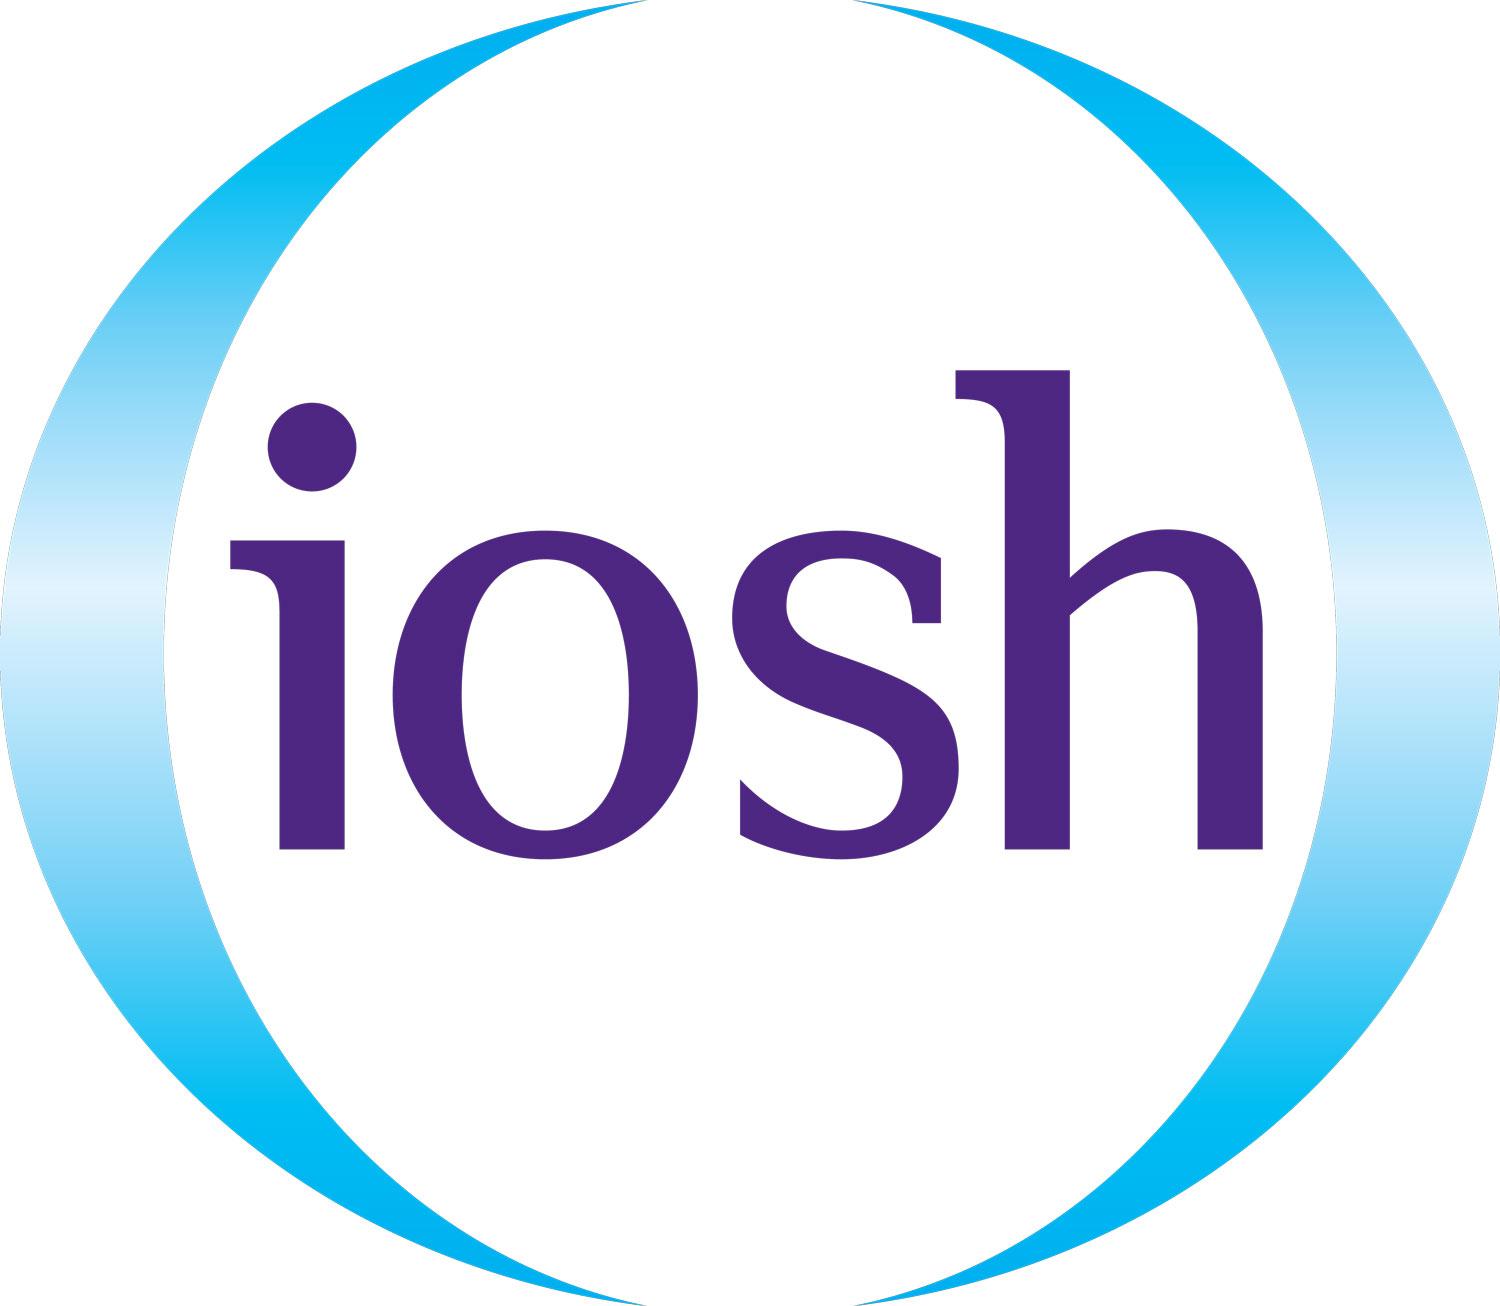 It is a British organization that provides training, support, and resources in the field of occupational health and safety. IOSH offers various courses and certifications designed to enhance the knowledge and skills of professionals working in the field of health and safety.